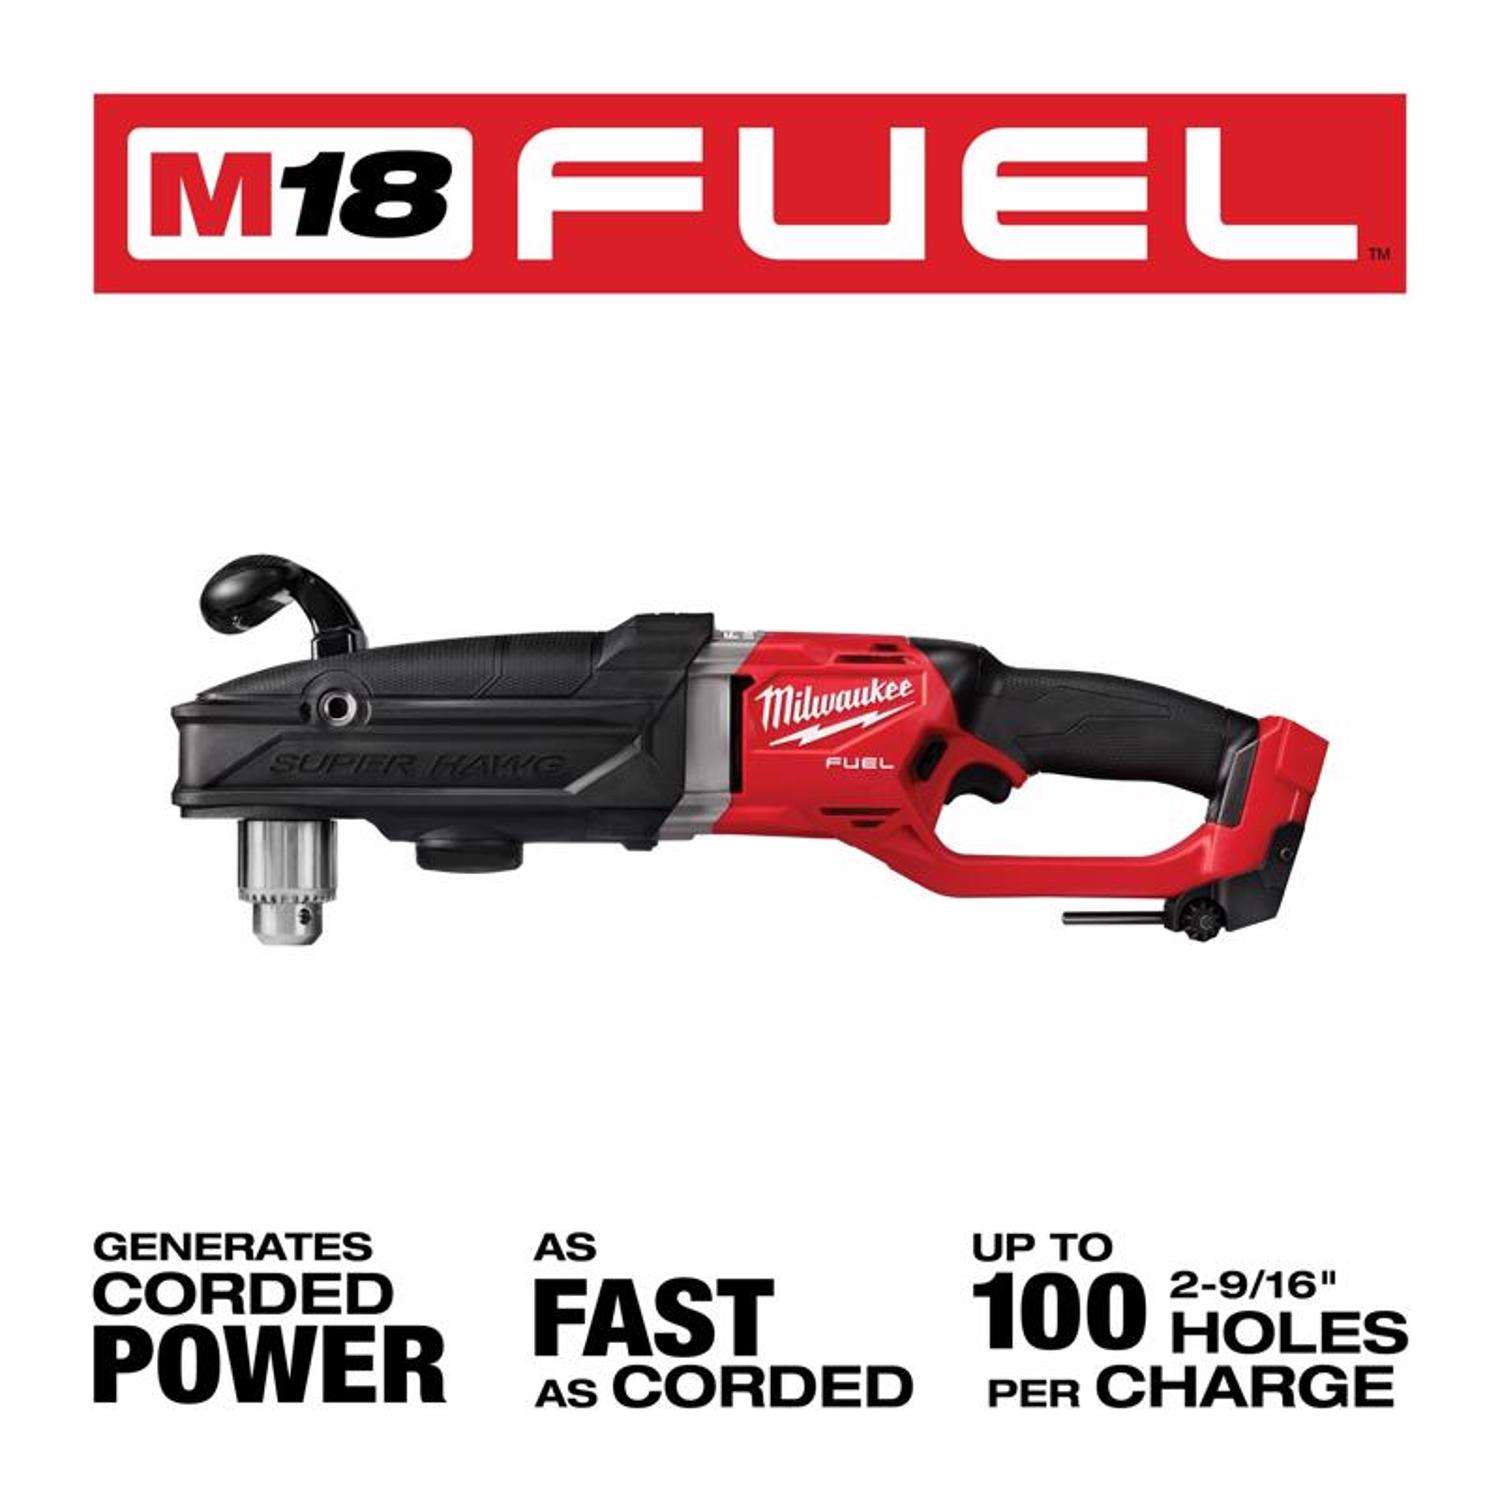 New) Milwaukee M18 FUEL 18-Volt Lithium-Ion Brushless Cordless 7-1/4 in.  Circular Saw Kit with One 6.0Ah Battery, Charger, Case - Discount Depot